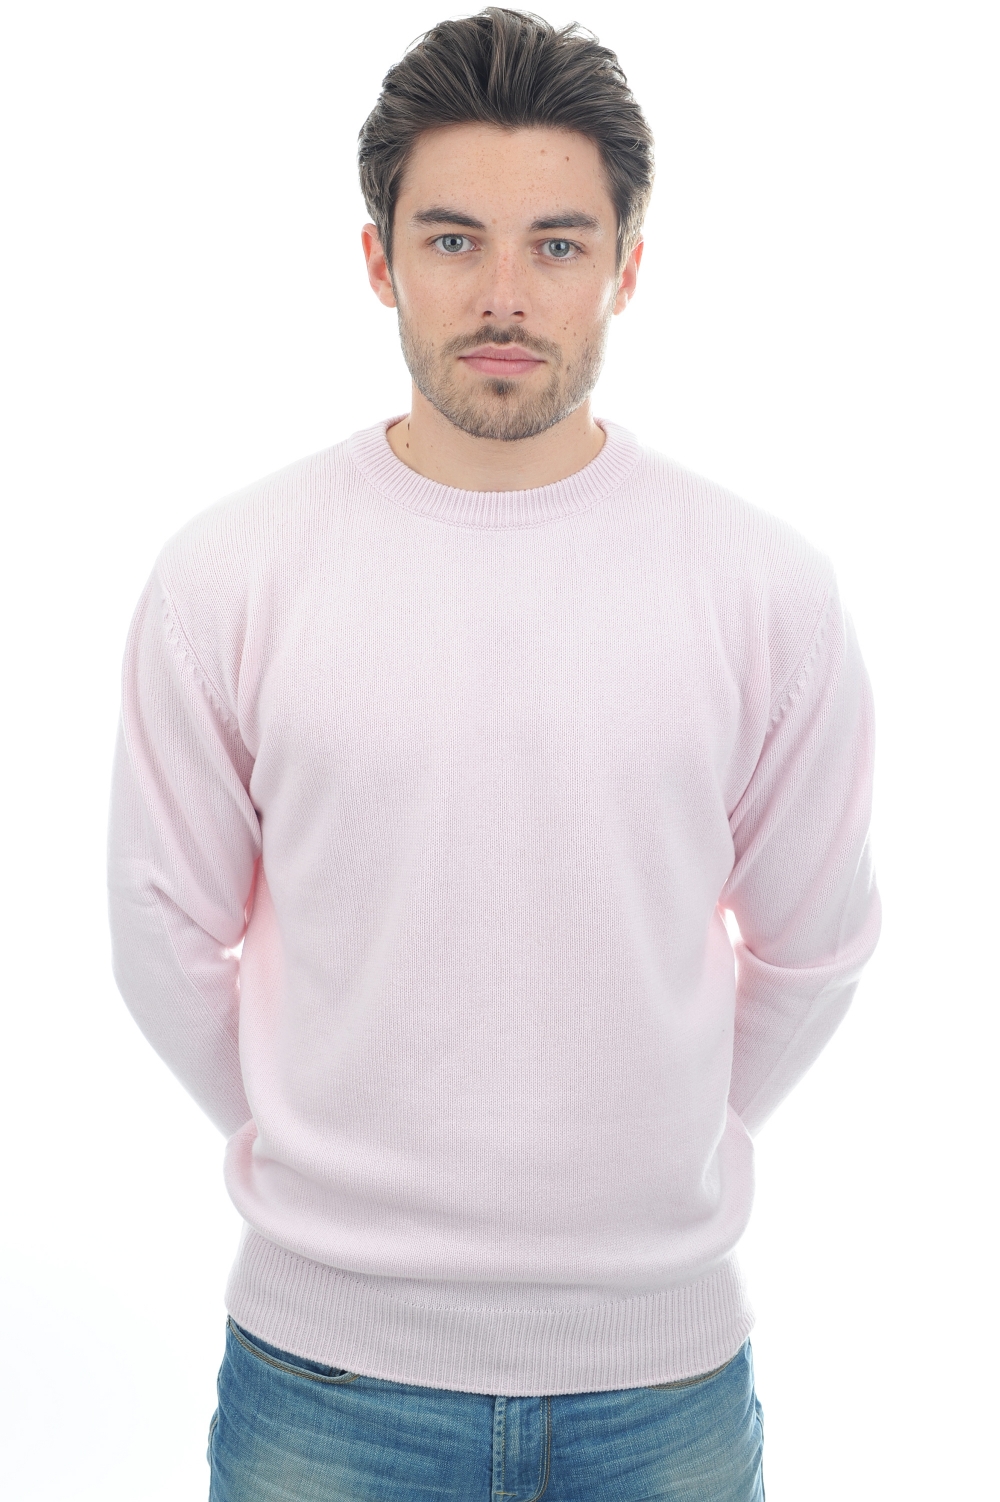 Cachemire pull homme col rond nestor rose pale 2xl